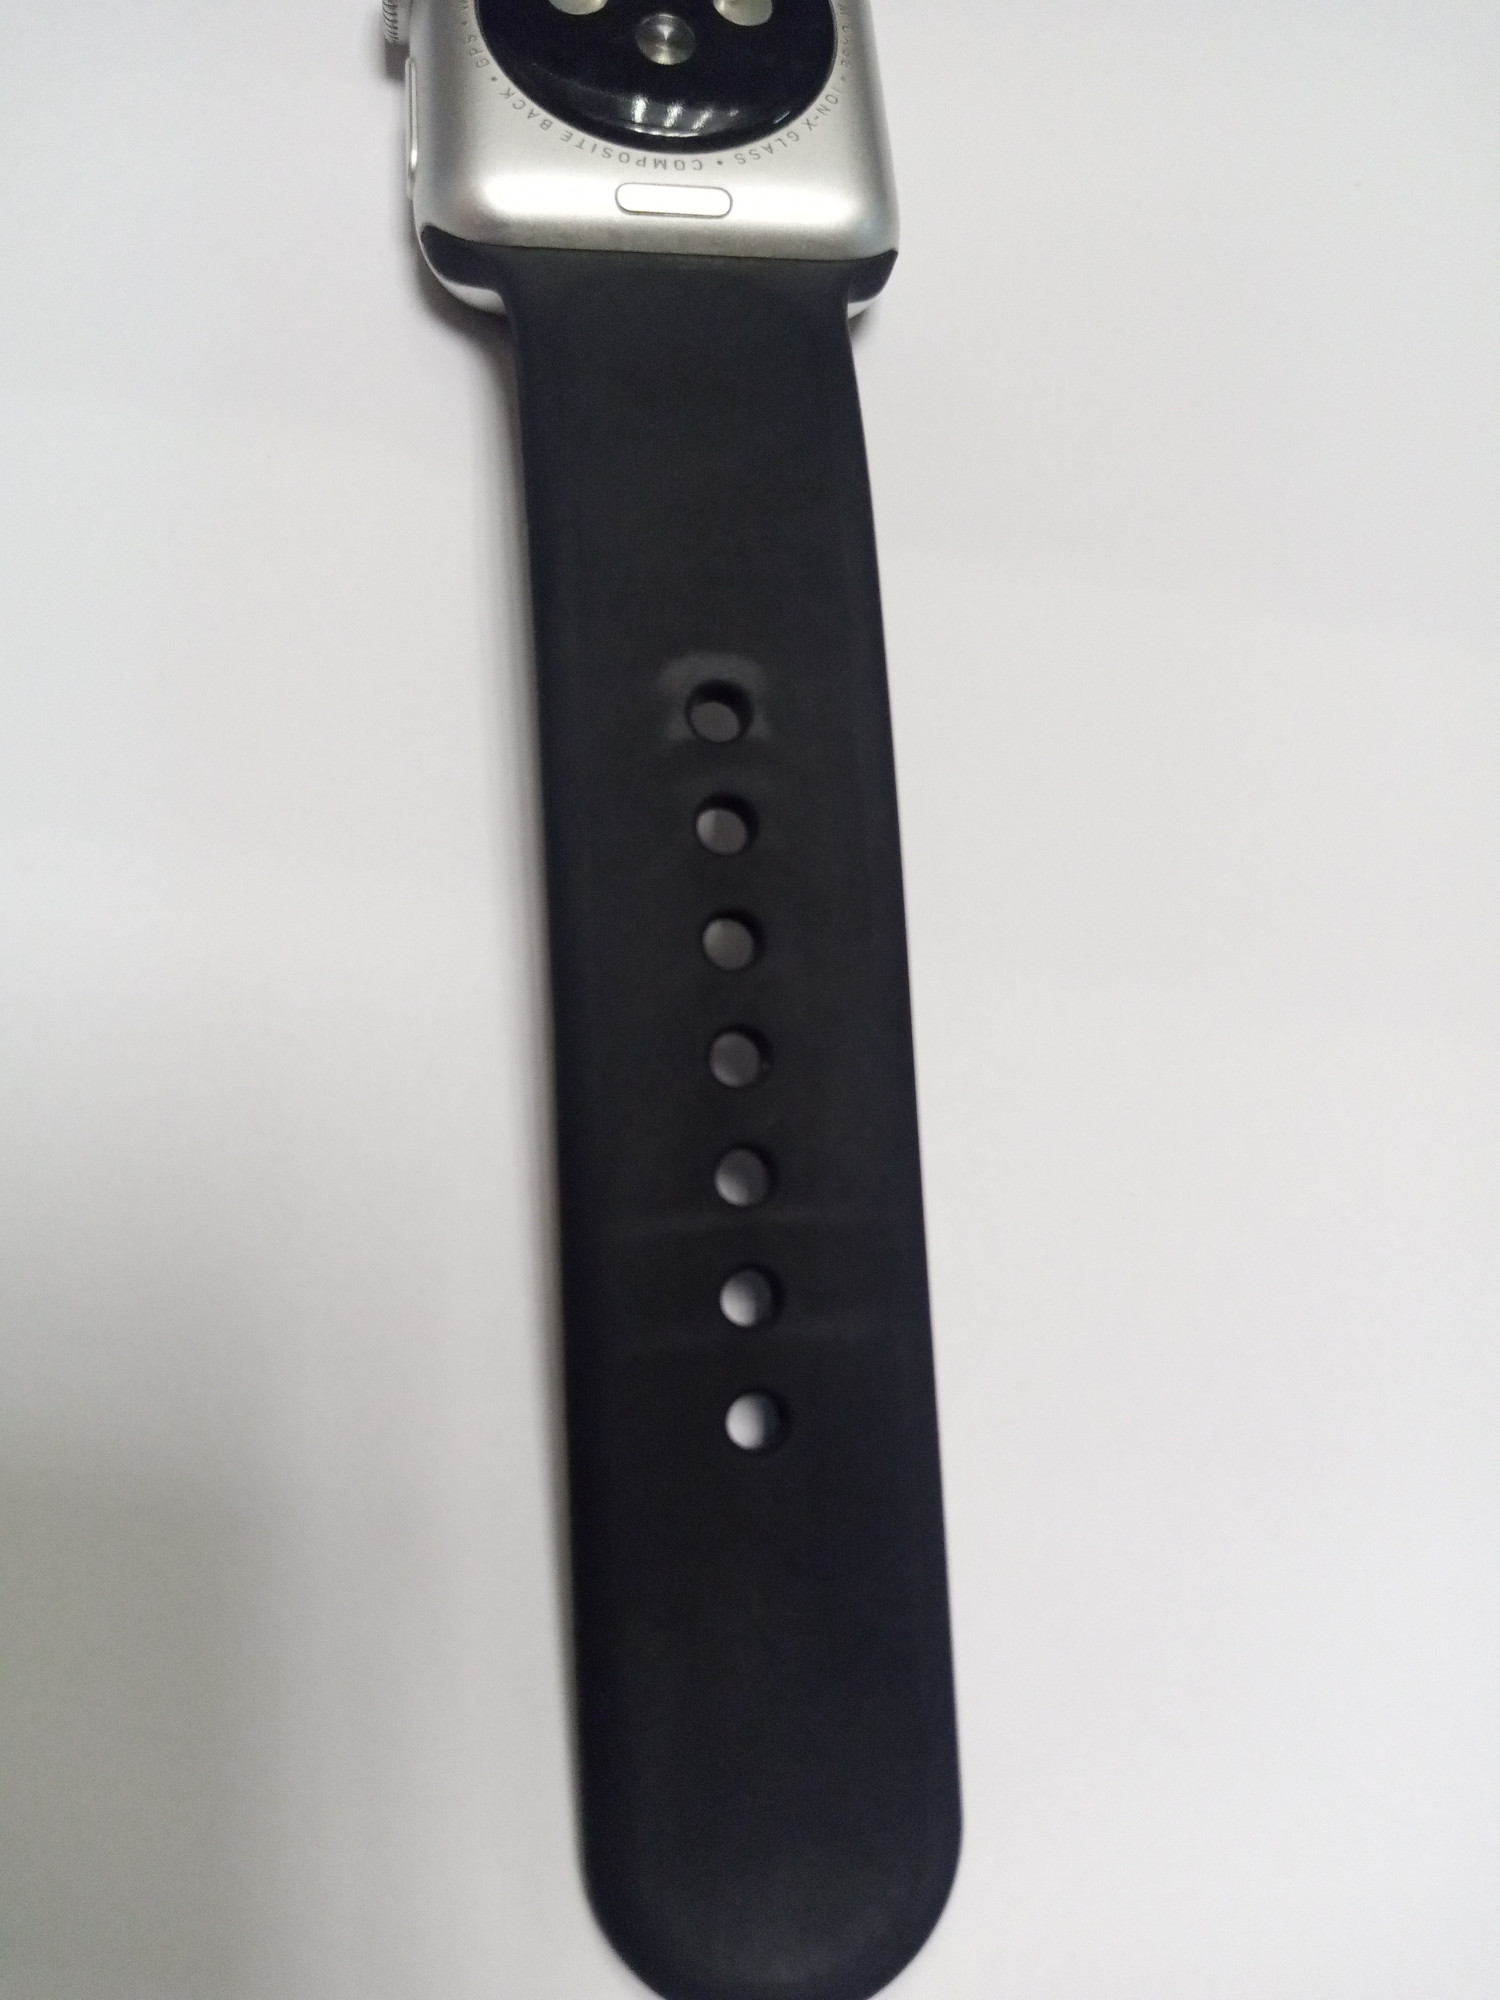 Смарт-годинник Apple Watch Series 3 38mm Space Grey Aluminum Case with Black Sport Band MTF02FS/A 5